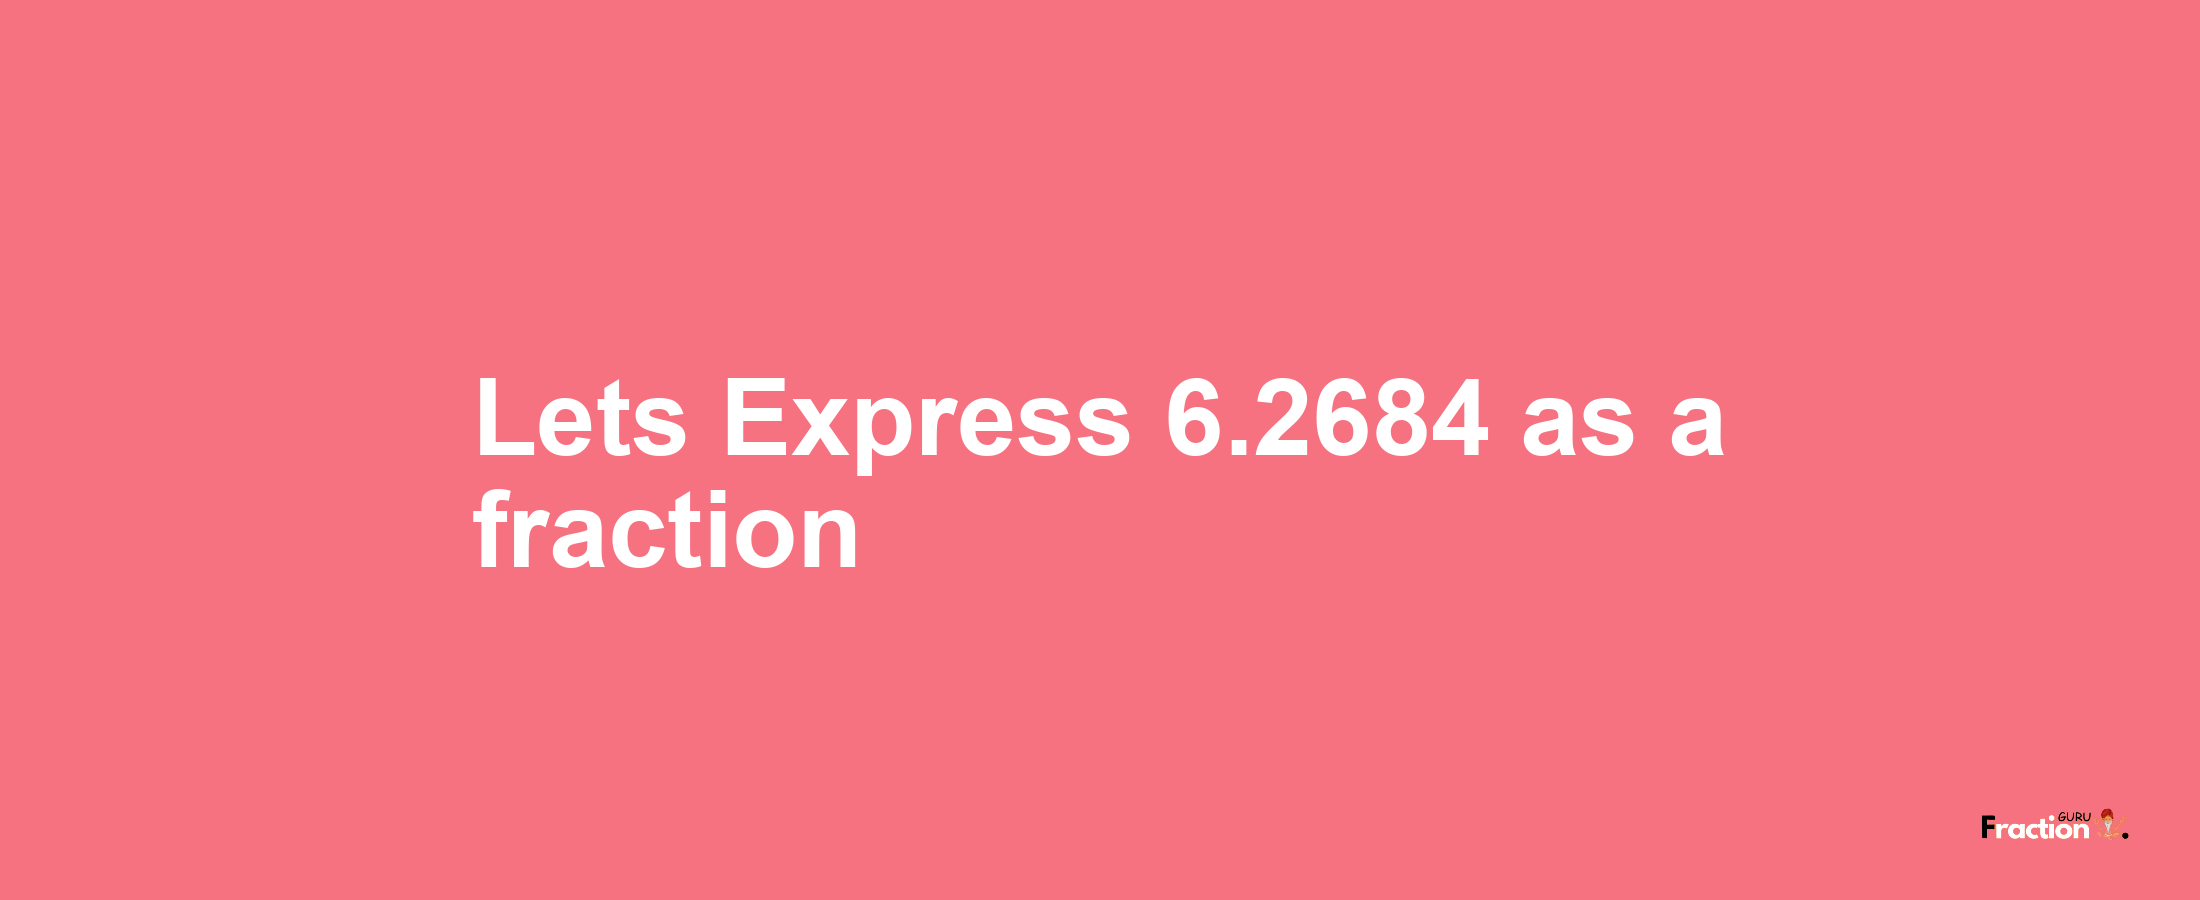 Lets Express 6.2684 as afraction